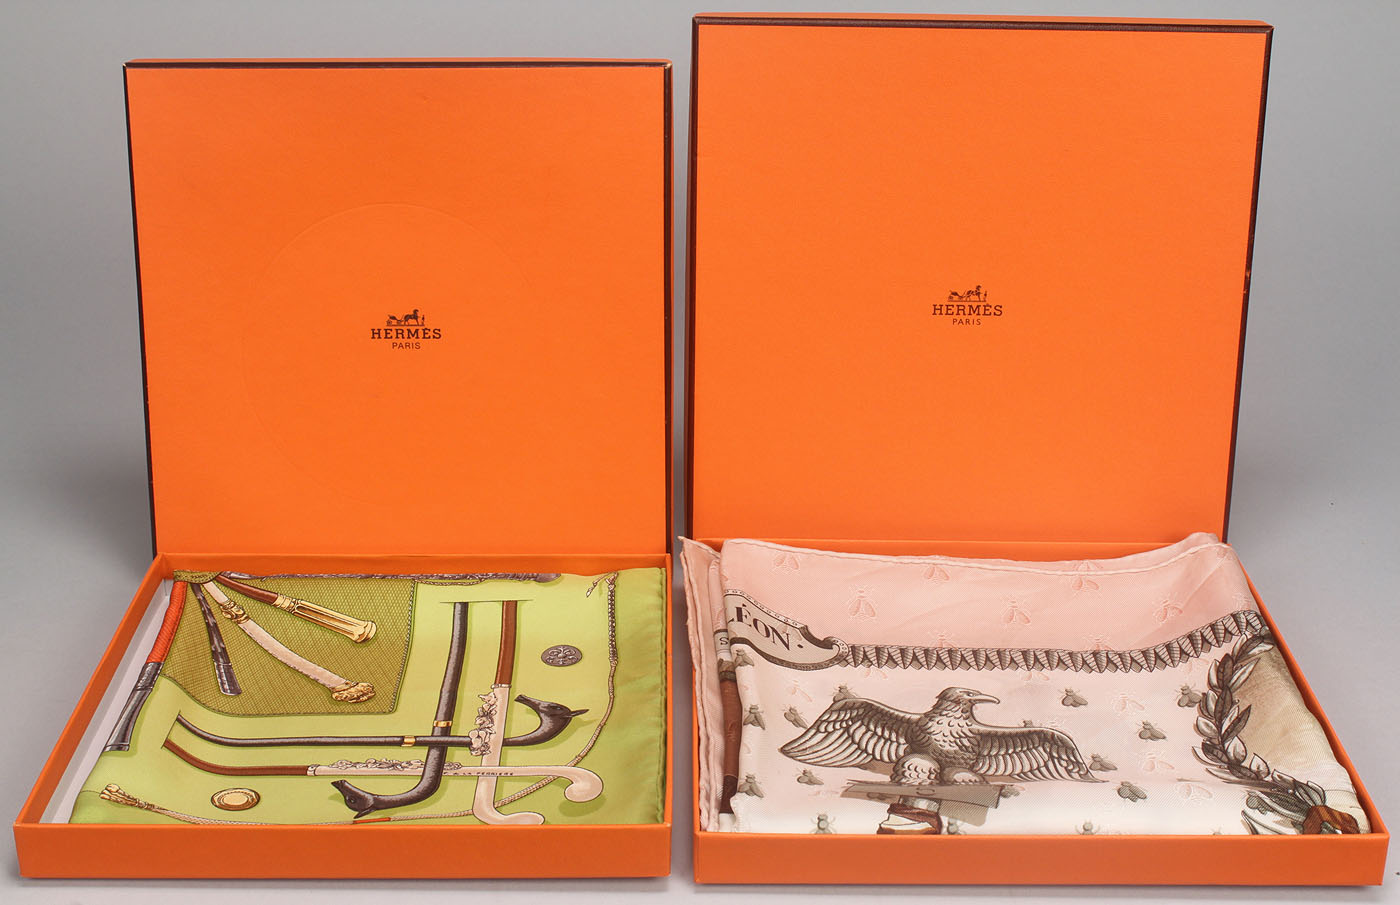 Sold at Auction: Collection of Authentic Hermes Paris Boxes